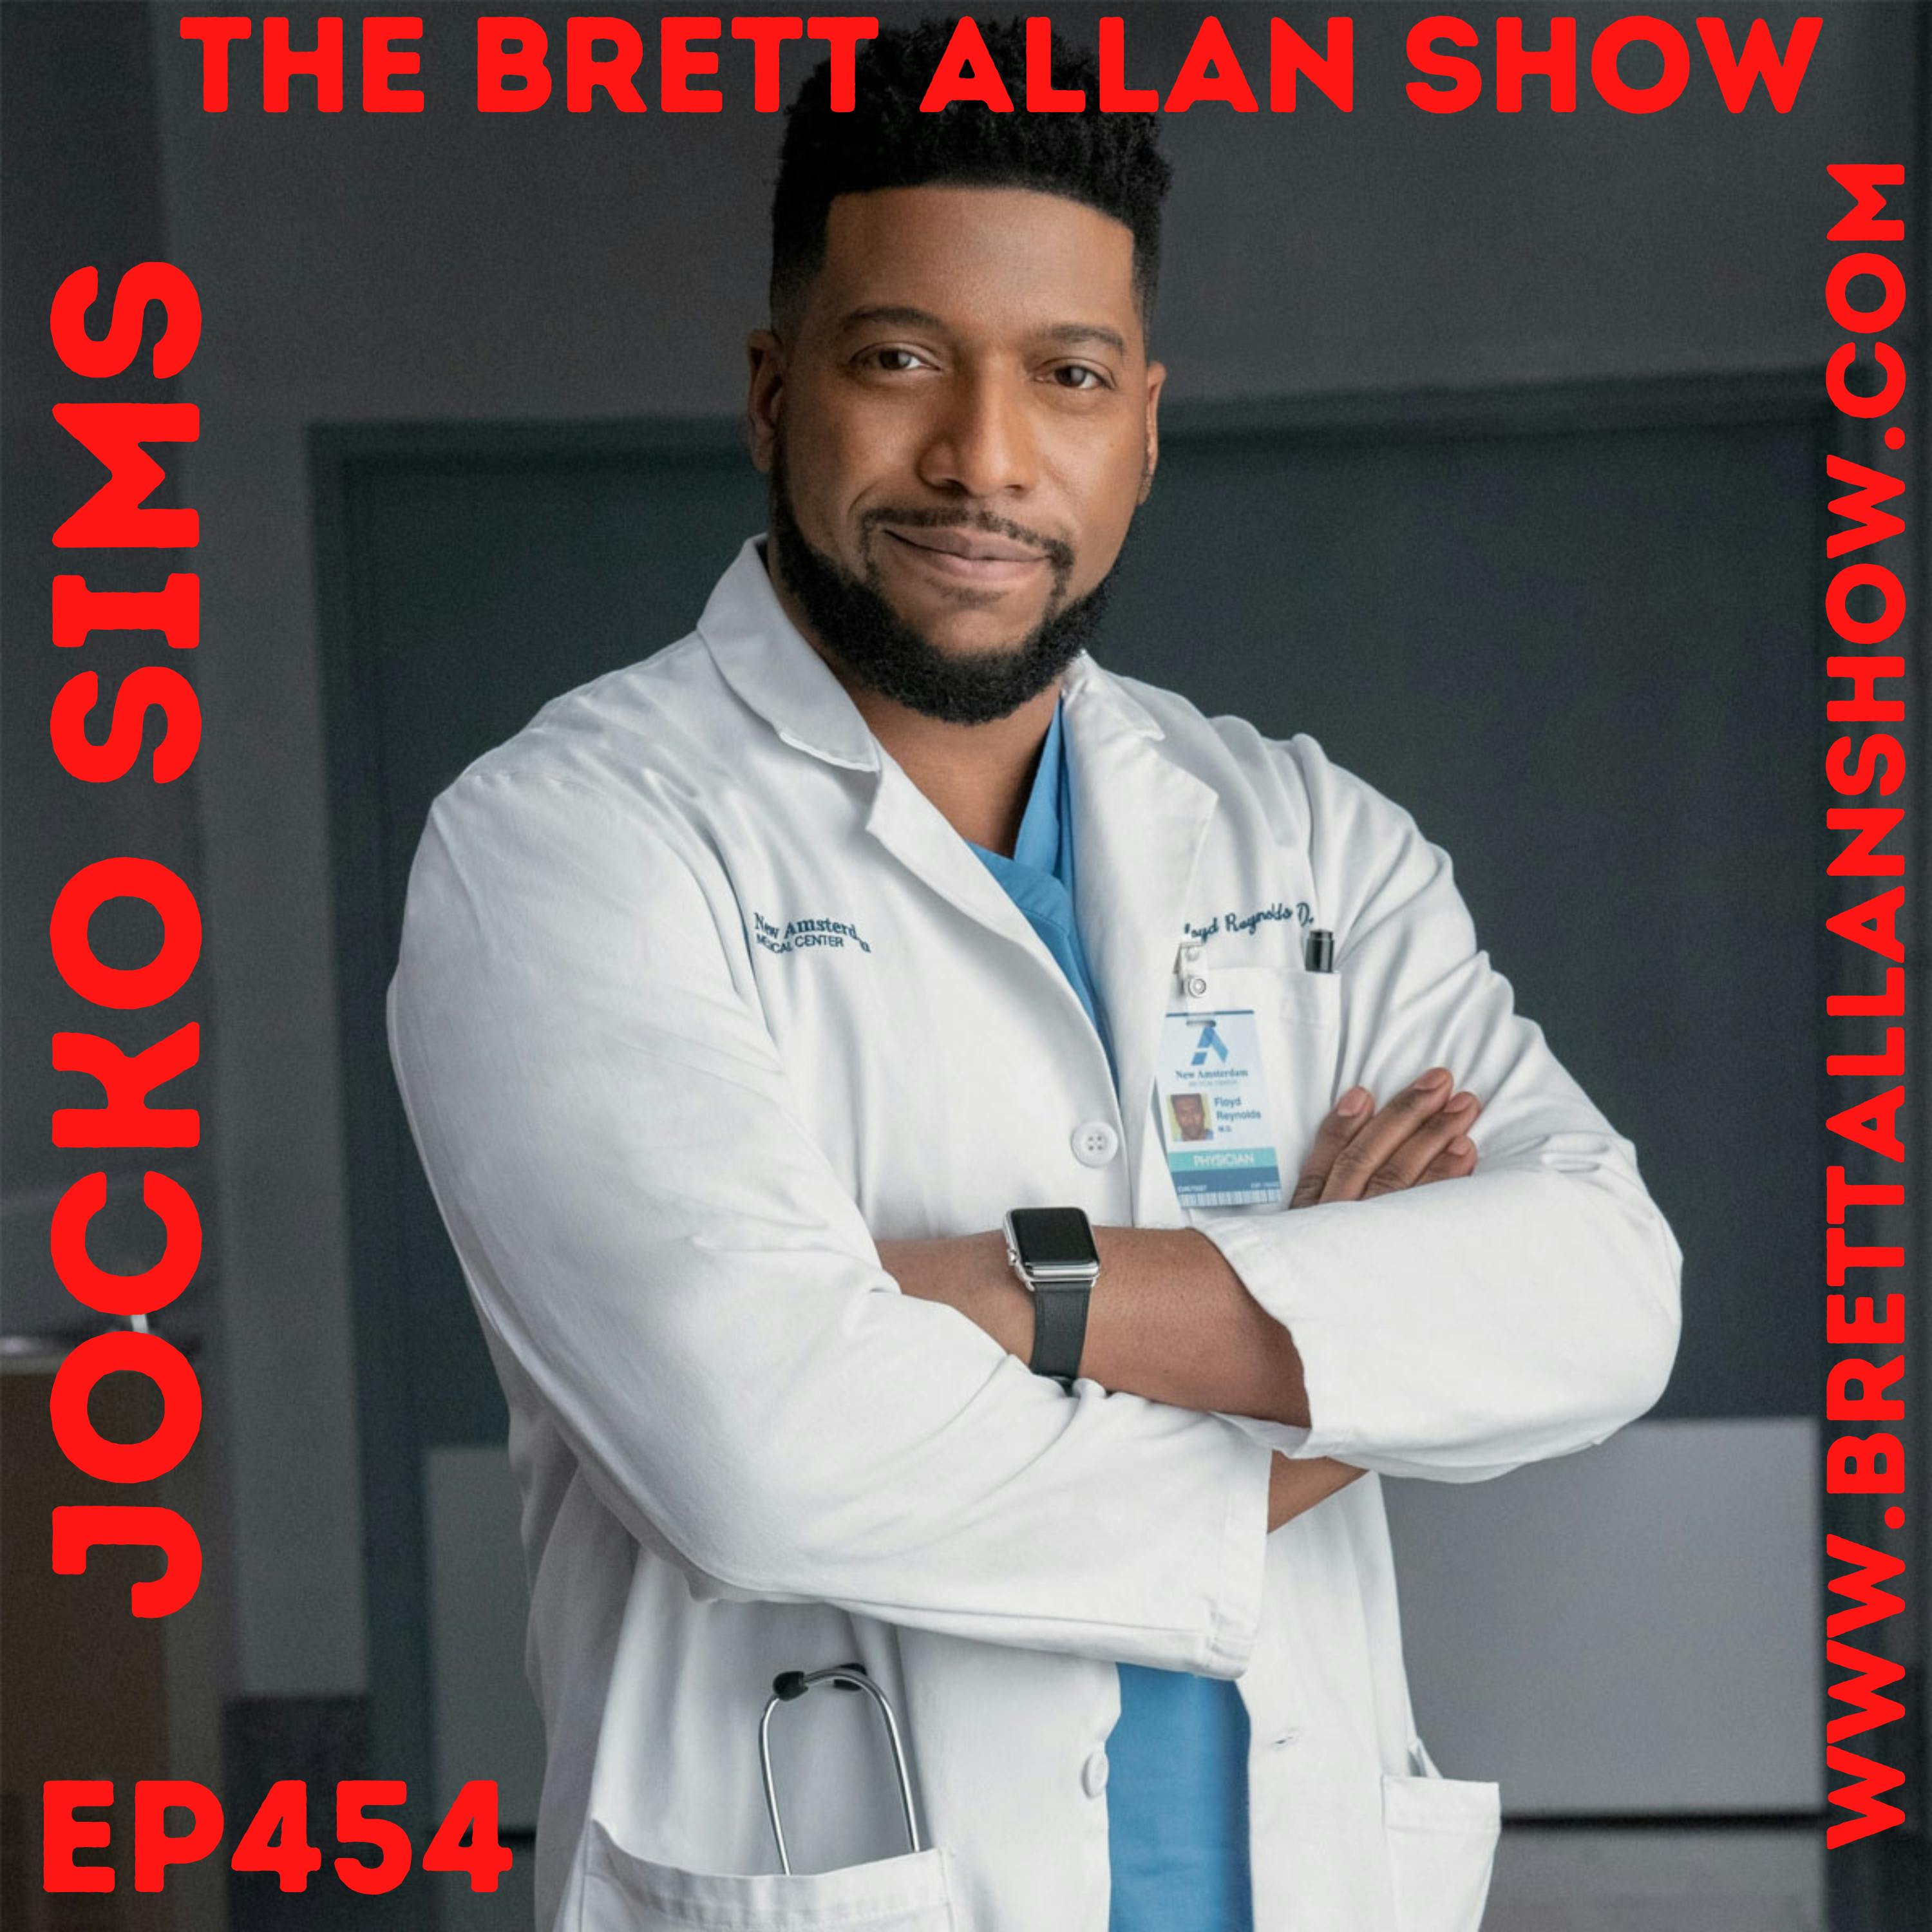 Jocko Sims Discusses the Fifth and Final Season of New Amsterdam and "Dr. Floyd Reynolds" and More!